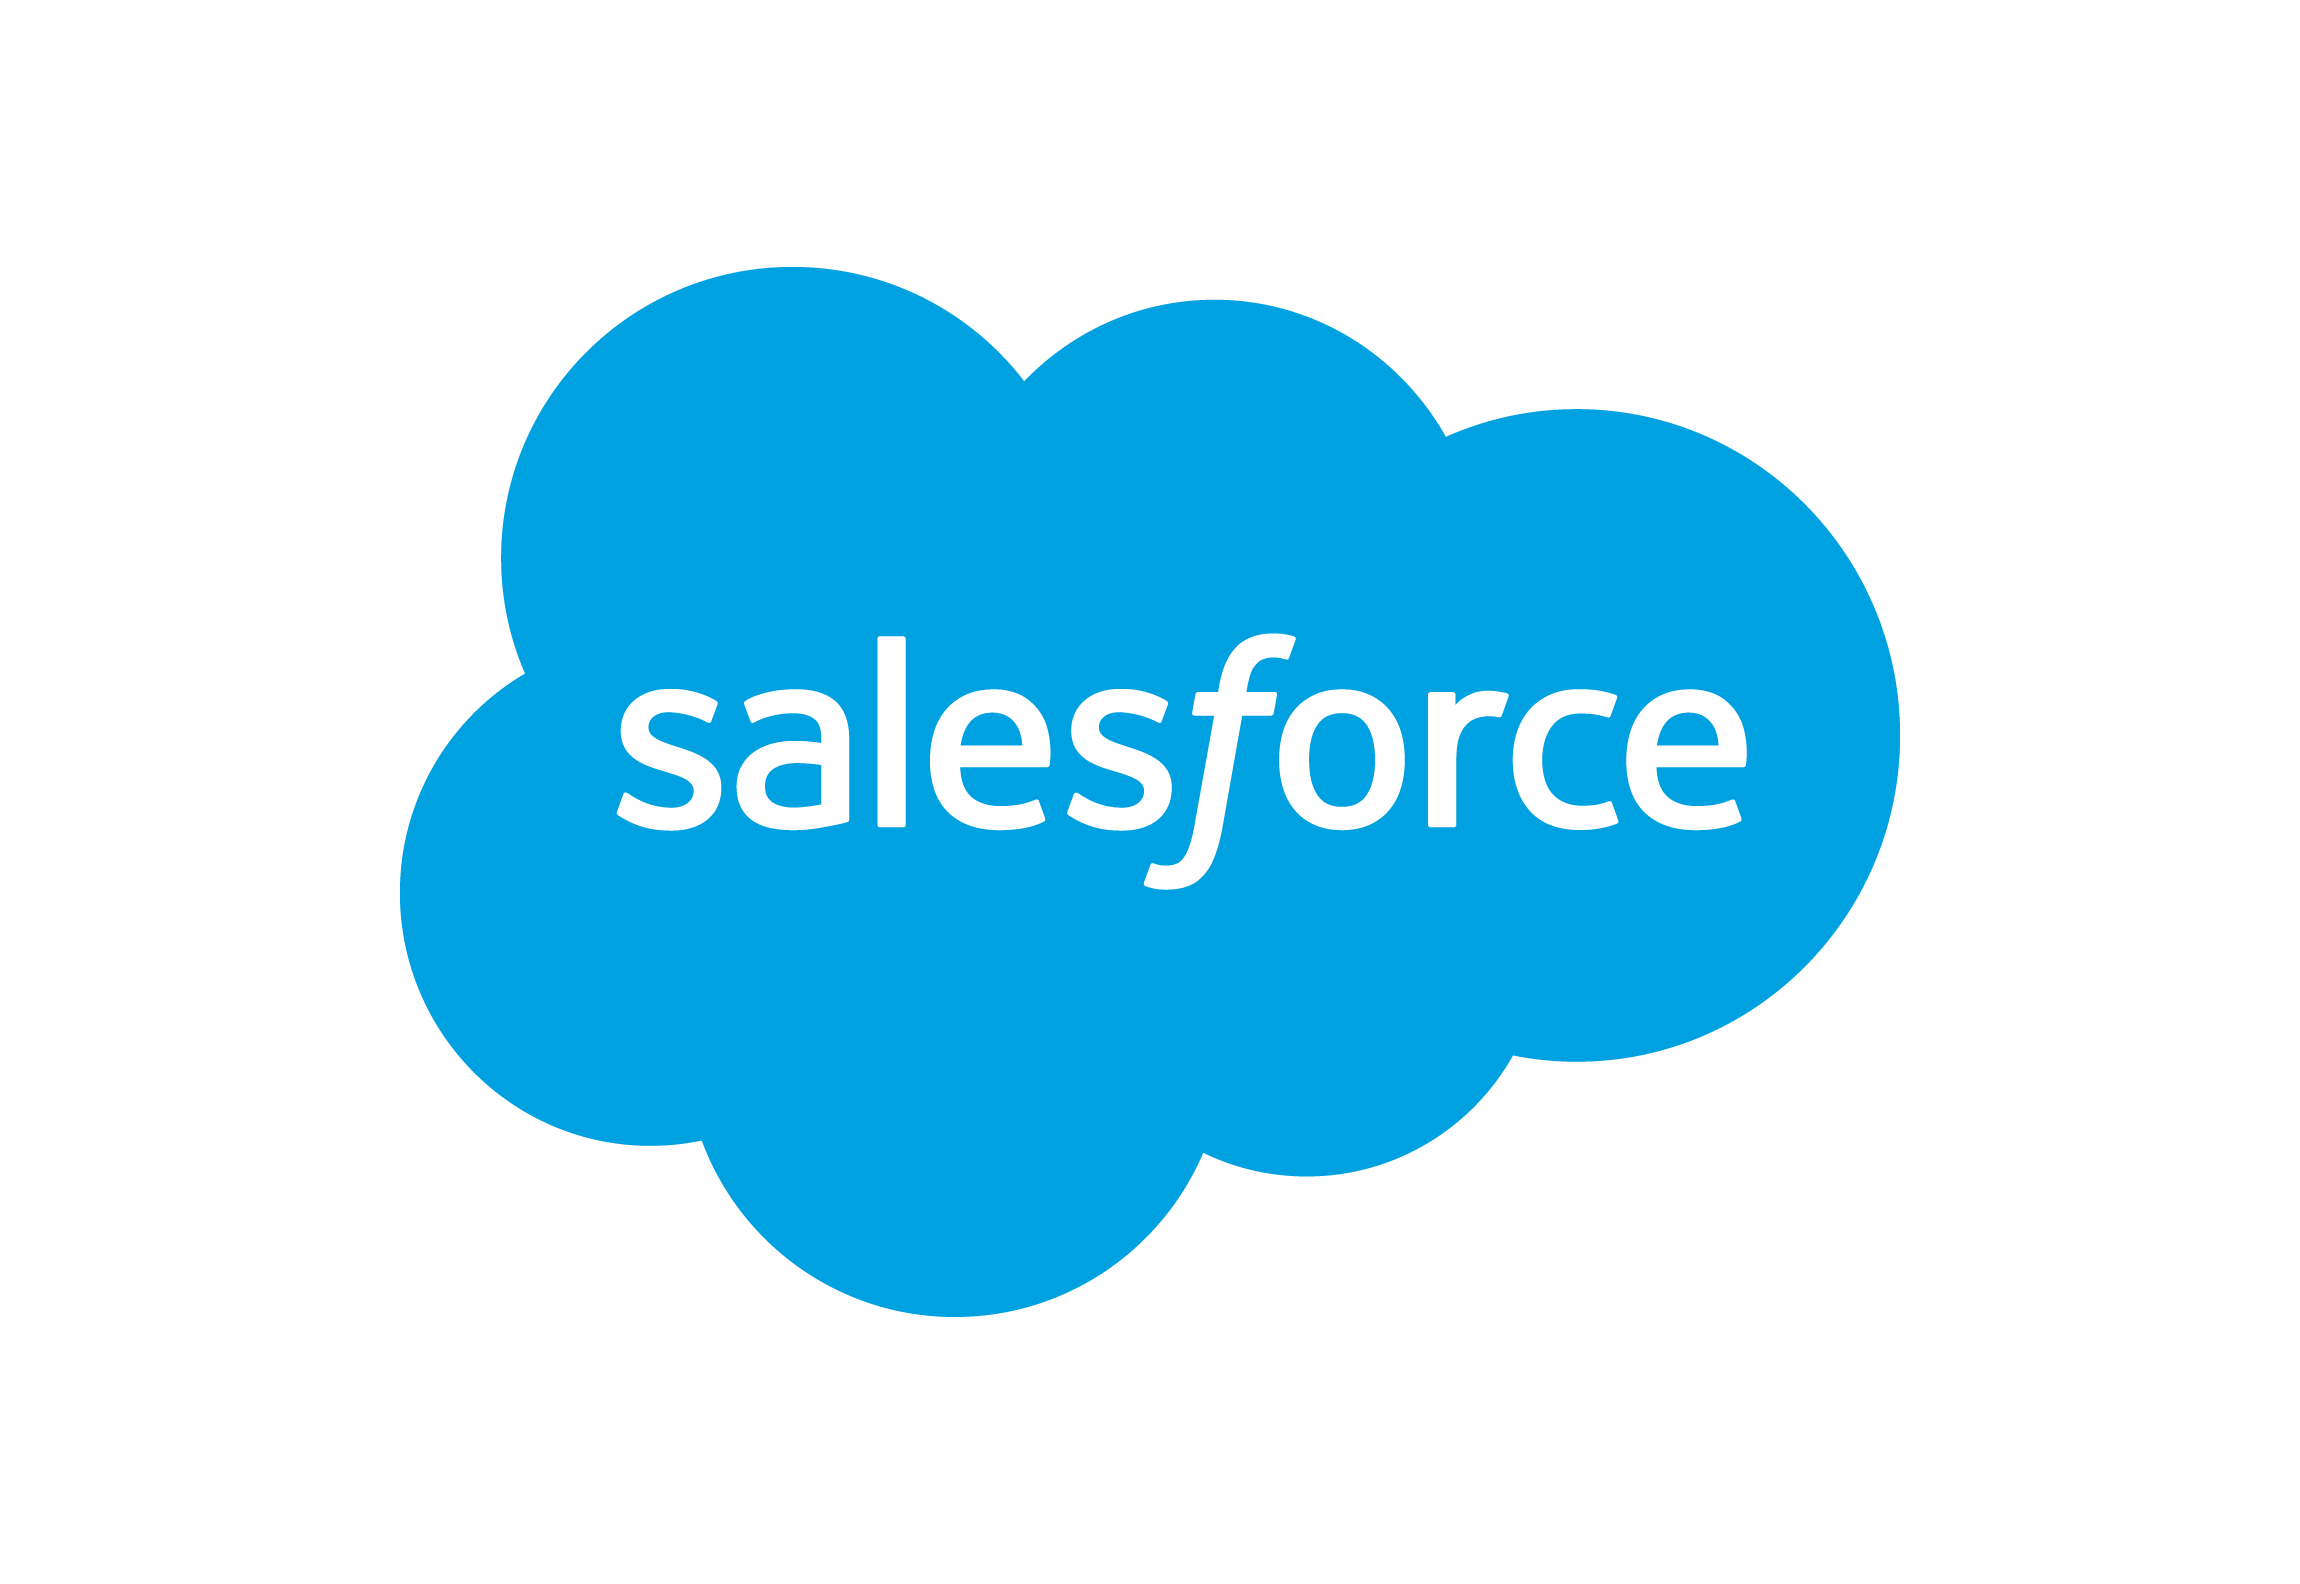 Who is Salesforce?